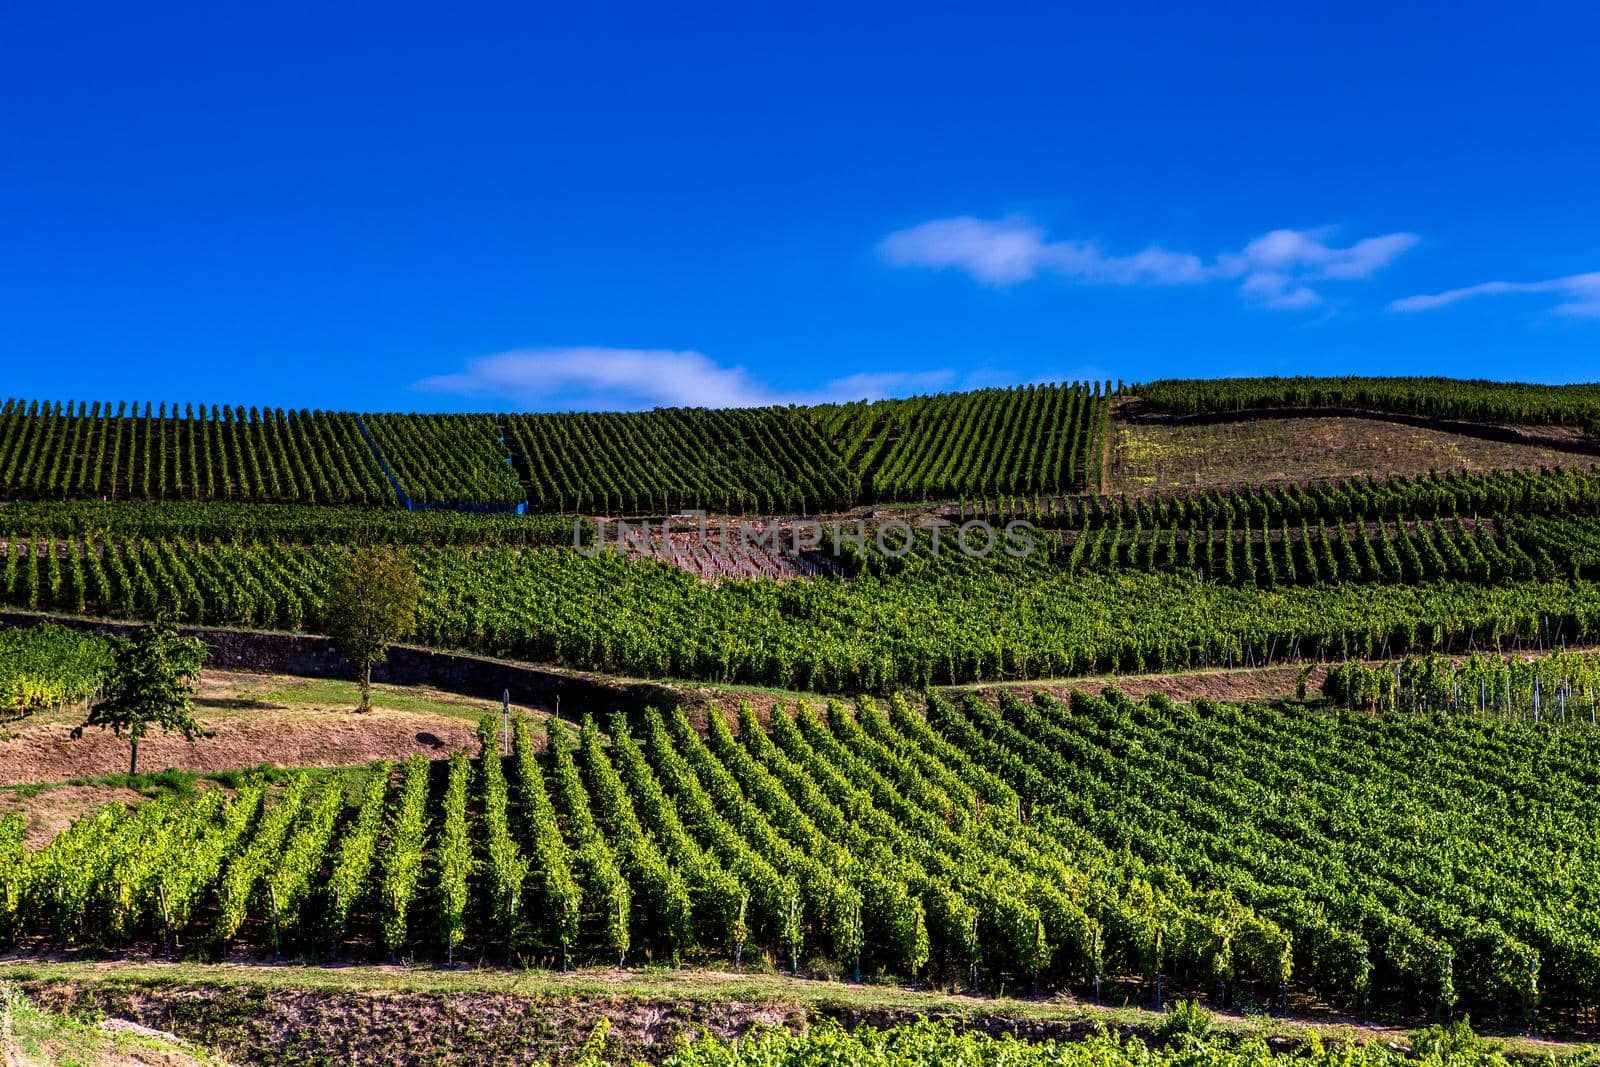 Vineyards on the wine road, Alsace, France by photogolfer